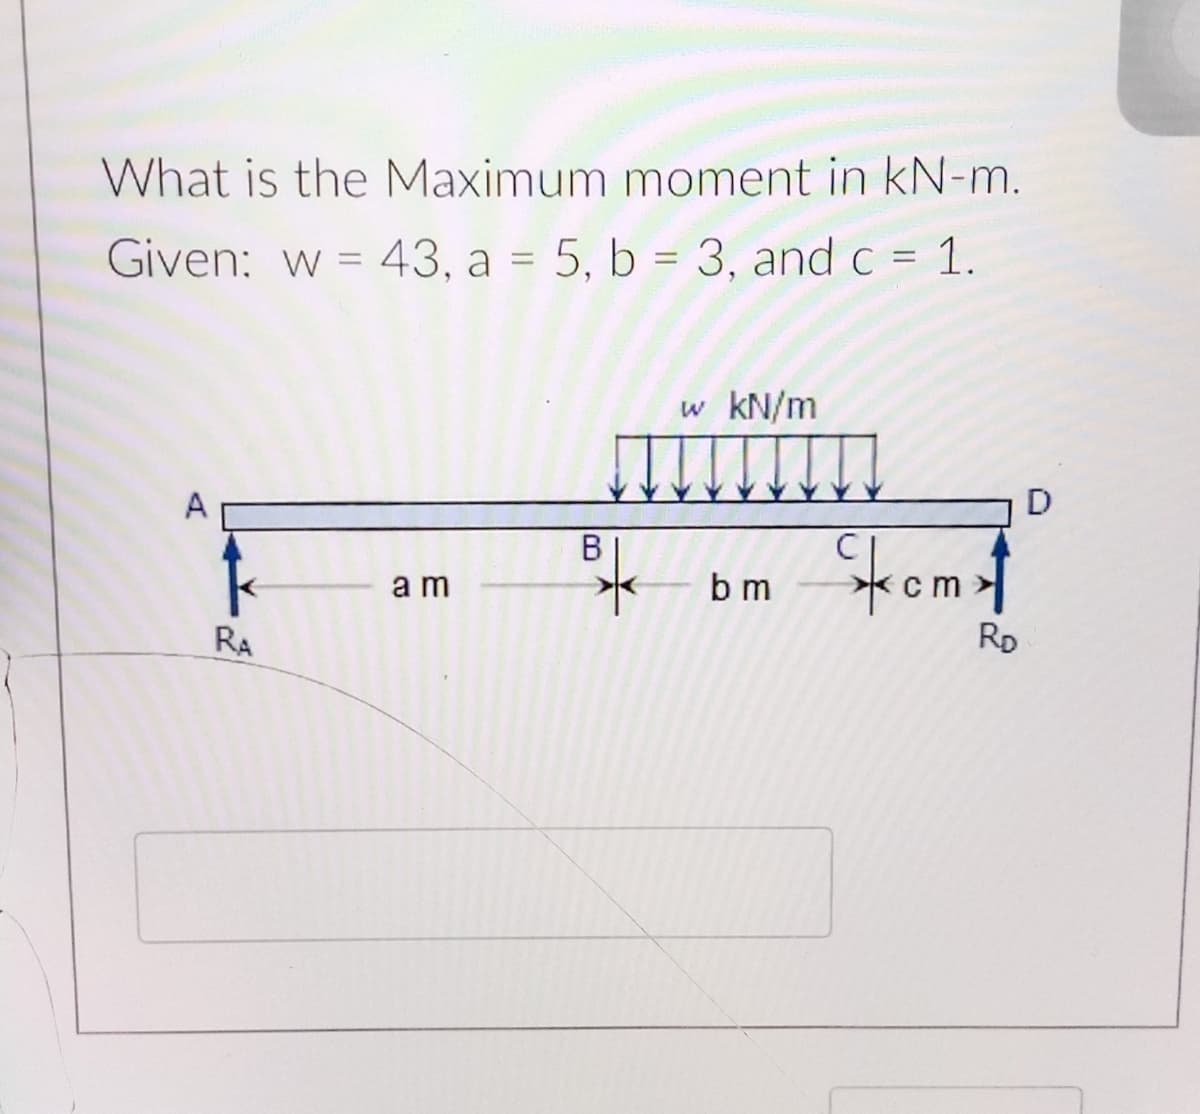 What is the Maximum moment in kN-m.
Given: w = 43, a = 5, b = 3, and c = 1.
%3D
w kN/m
D
A
Stromst
k
b m
a m
RD
RA
